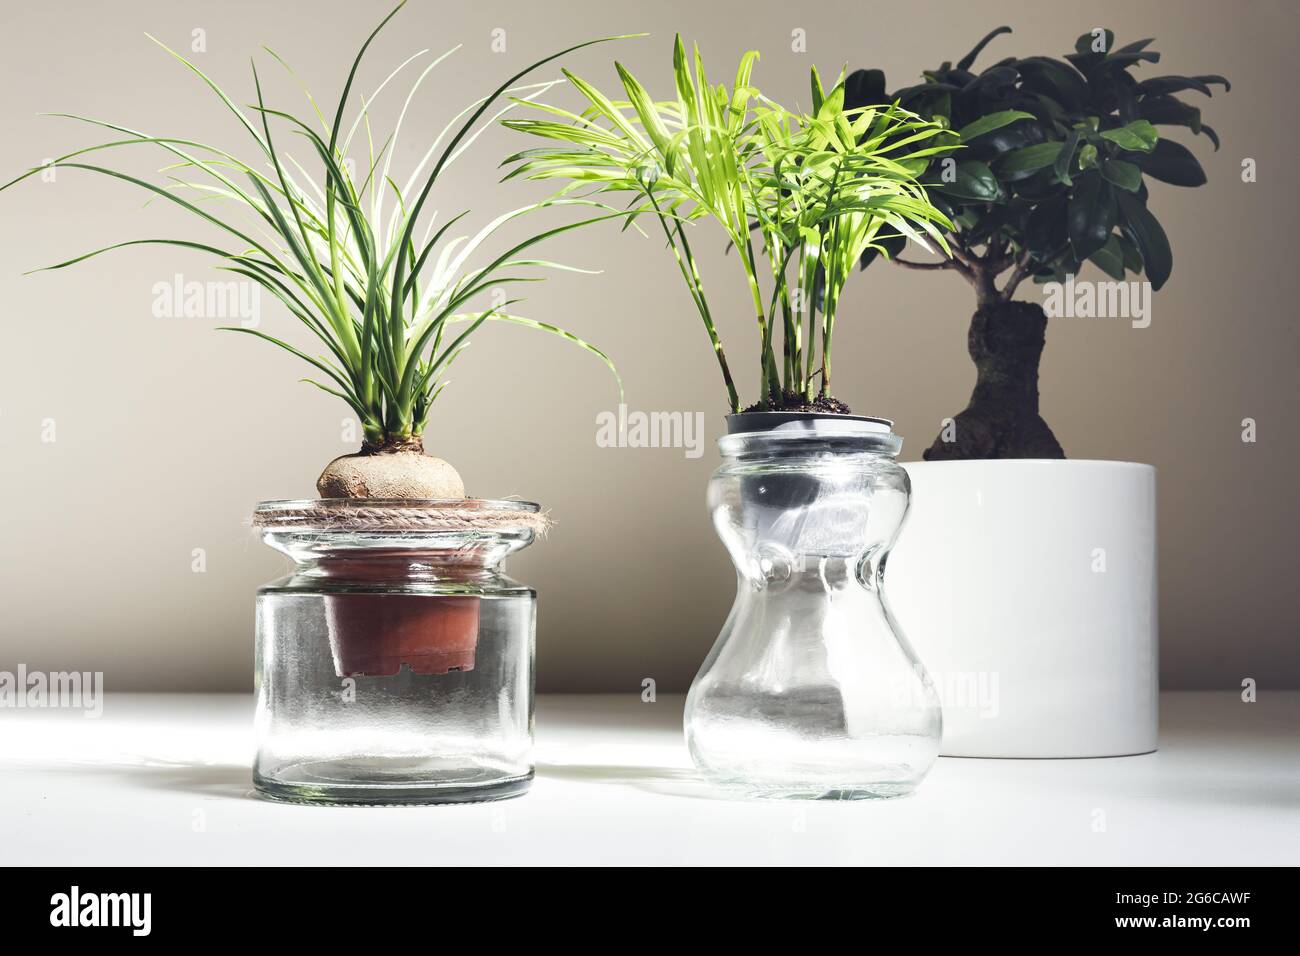 Indoor plants - beaucarnea recurvata, chamaedorea in glass jars and ficus ginseng on white table, home gardening concept Stock Photo